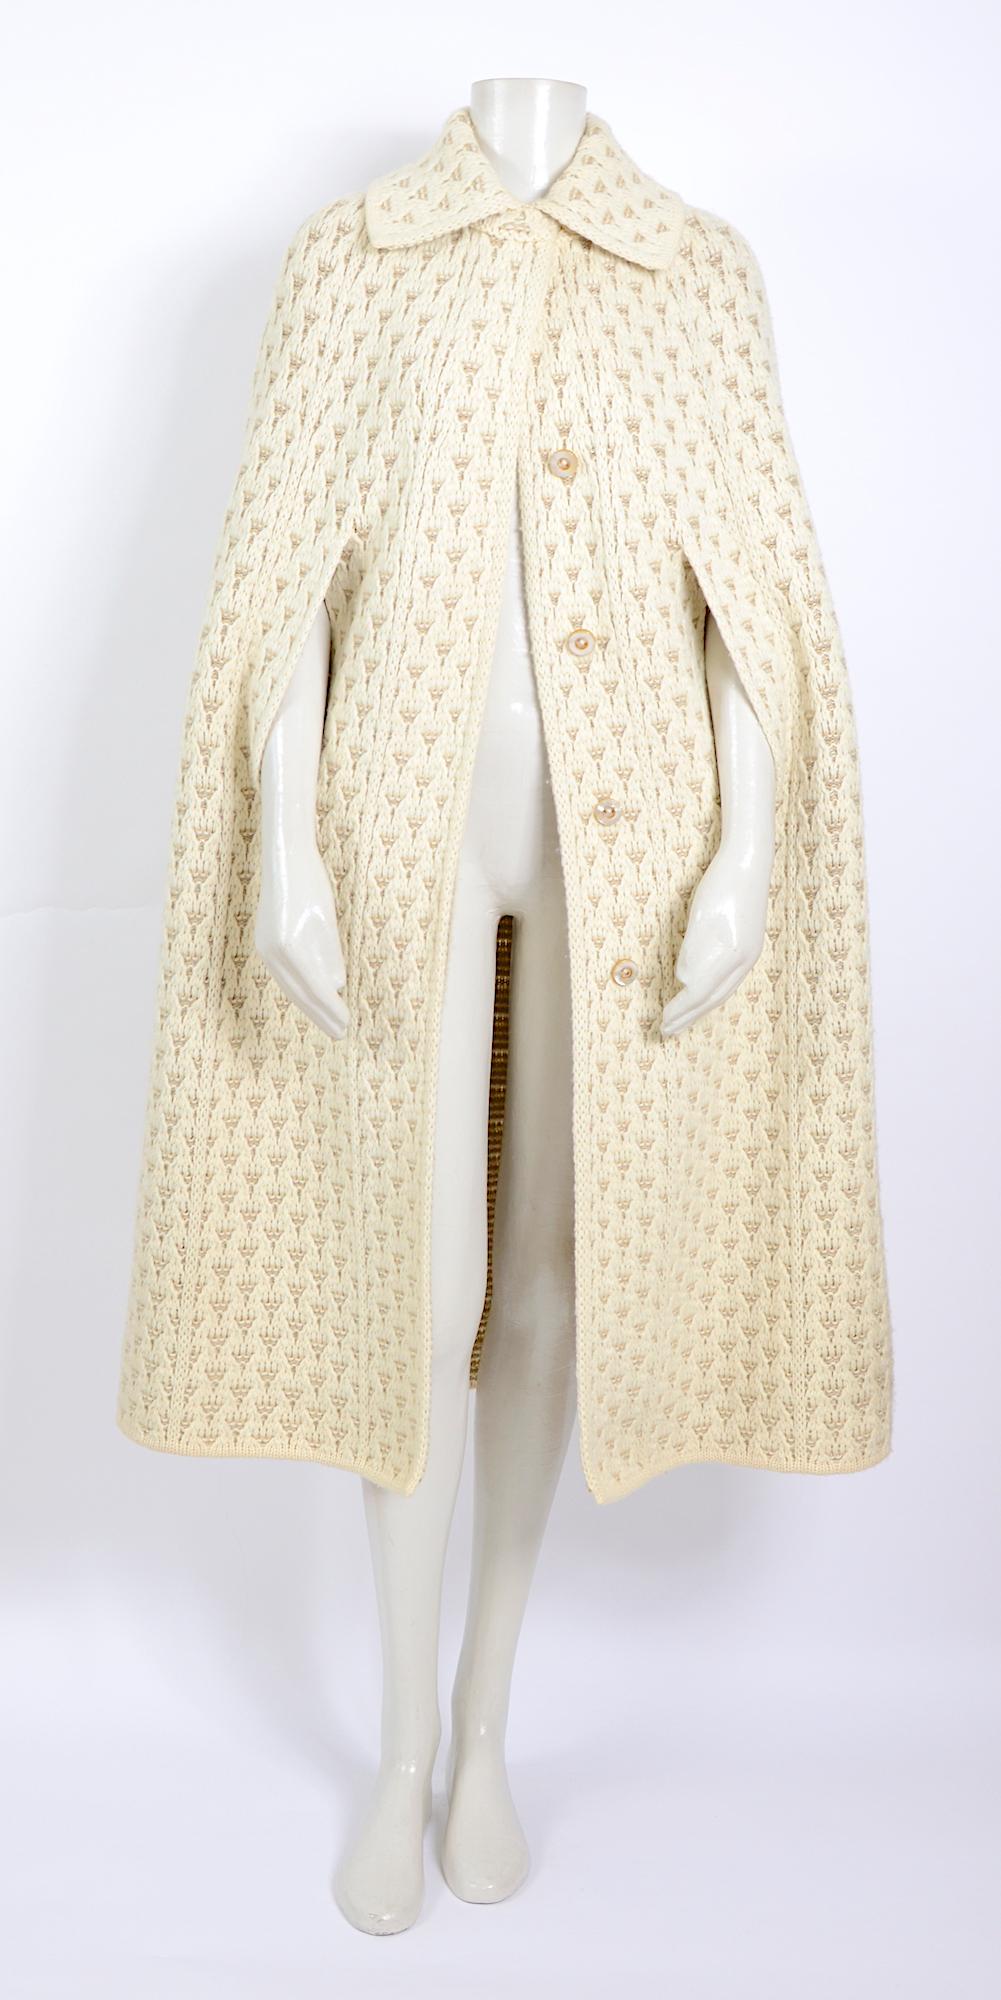 Albertina (Giubbolini) Roma very often quoted as the Chanel of the knitwear.
Holding this 1960s cape in my hands I understand why because this is such a beautifully very well executed knitwear piece. 

100% wool, no size label, please go by the